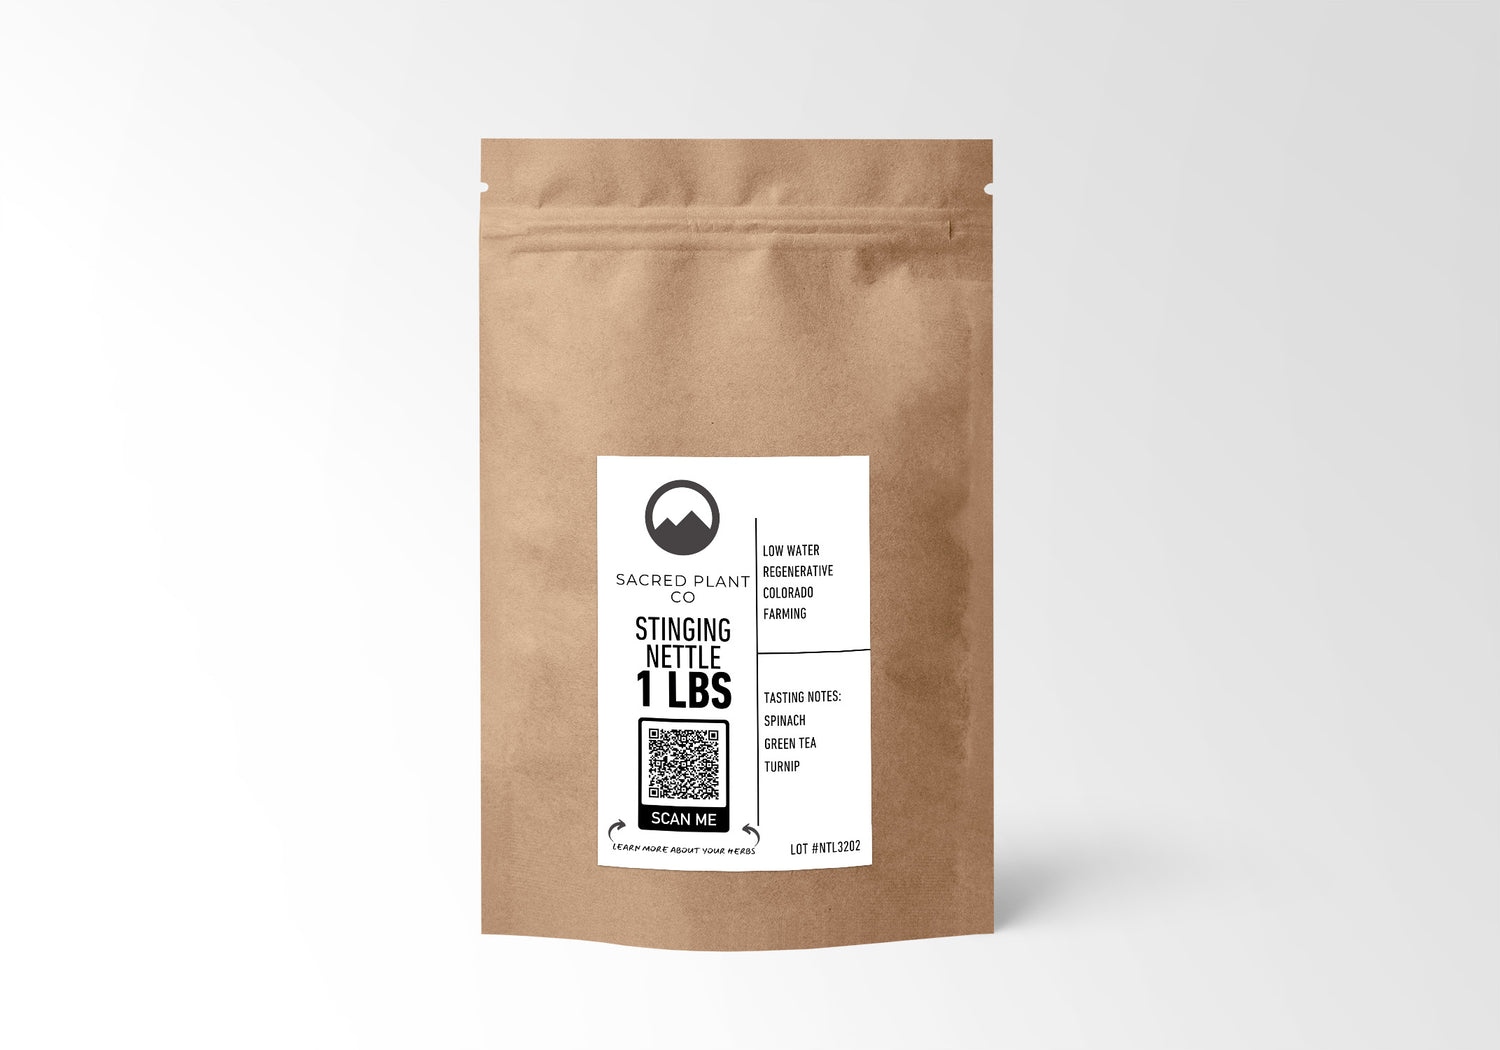 A 1-pound brown kraft paper bag labeled Sacred Plant Co Stinging Nettle, featuring low water regenerative Colorado farming, with tasting notes of spinach, green tea, and turnip. A QR code for more information is also visible.&quot;